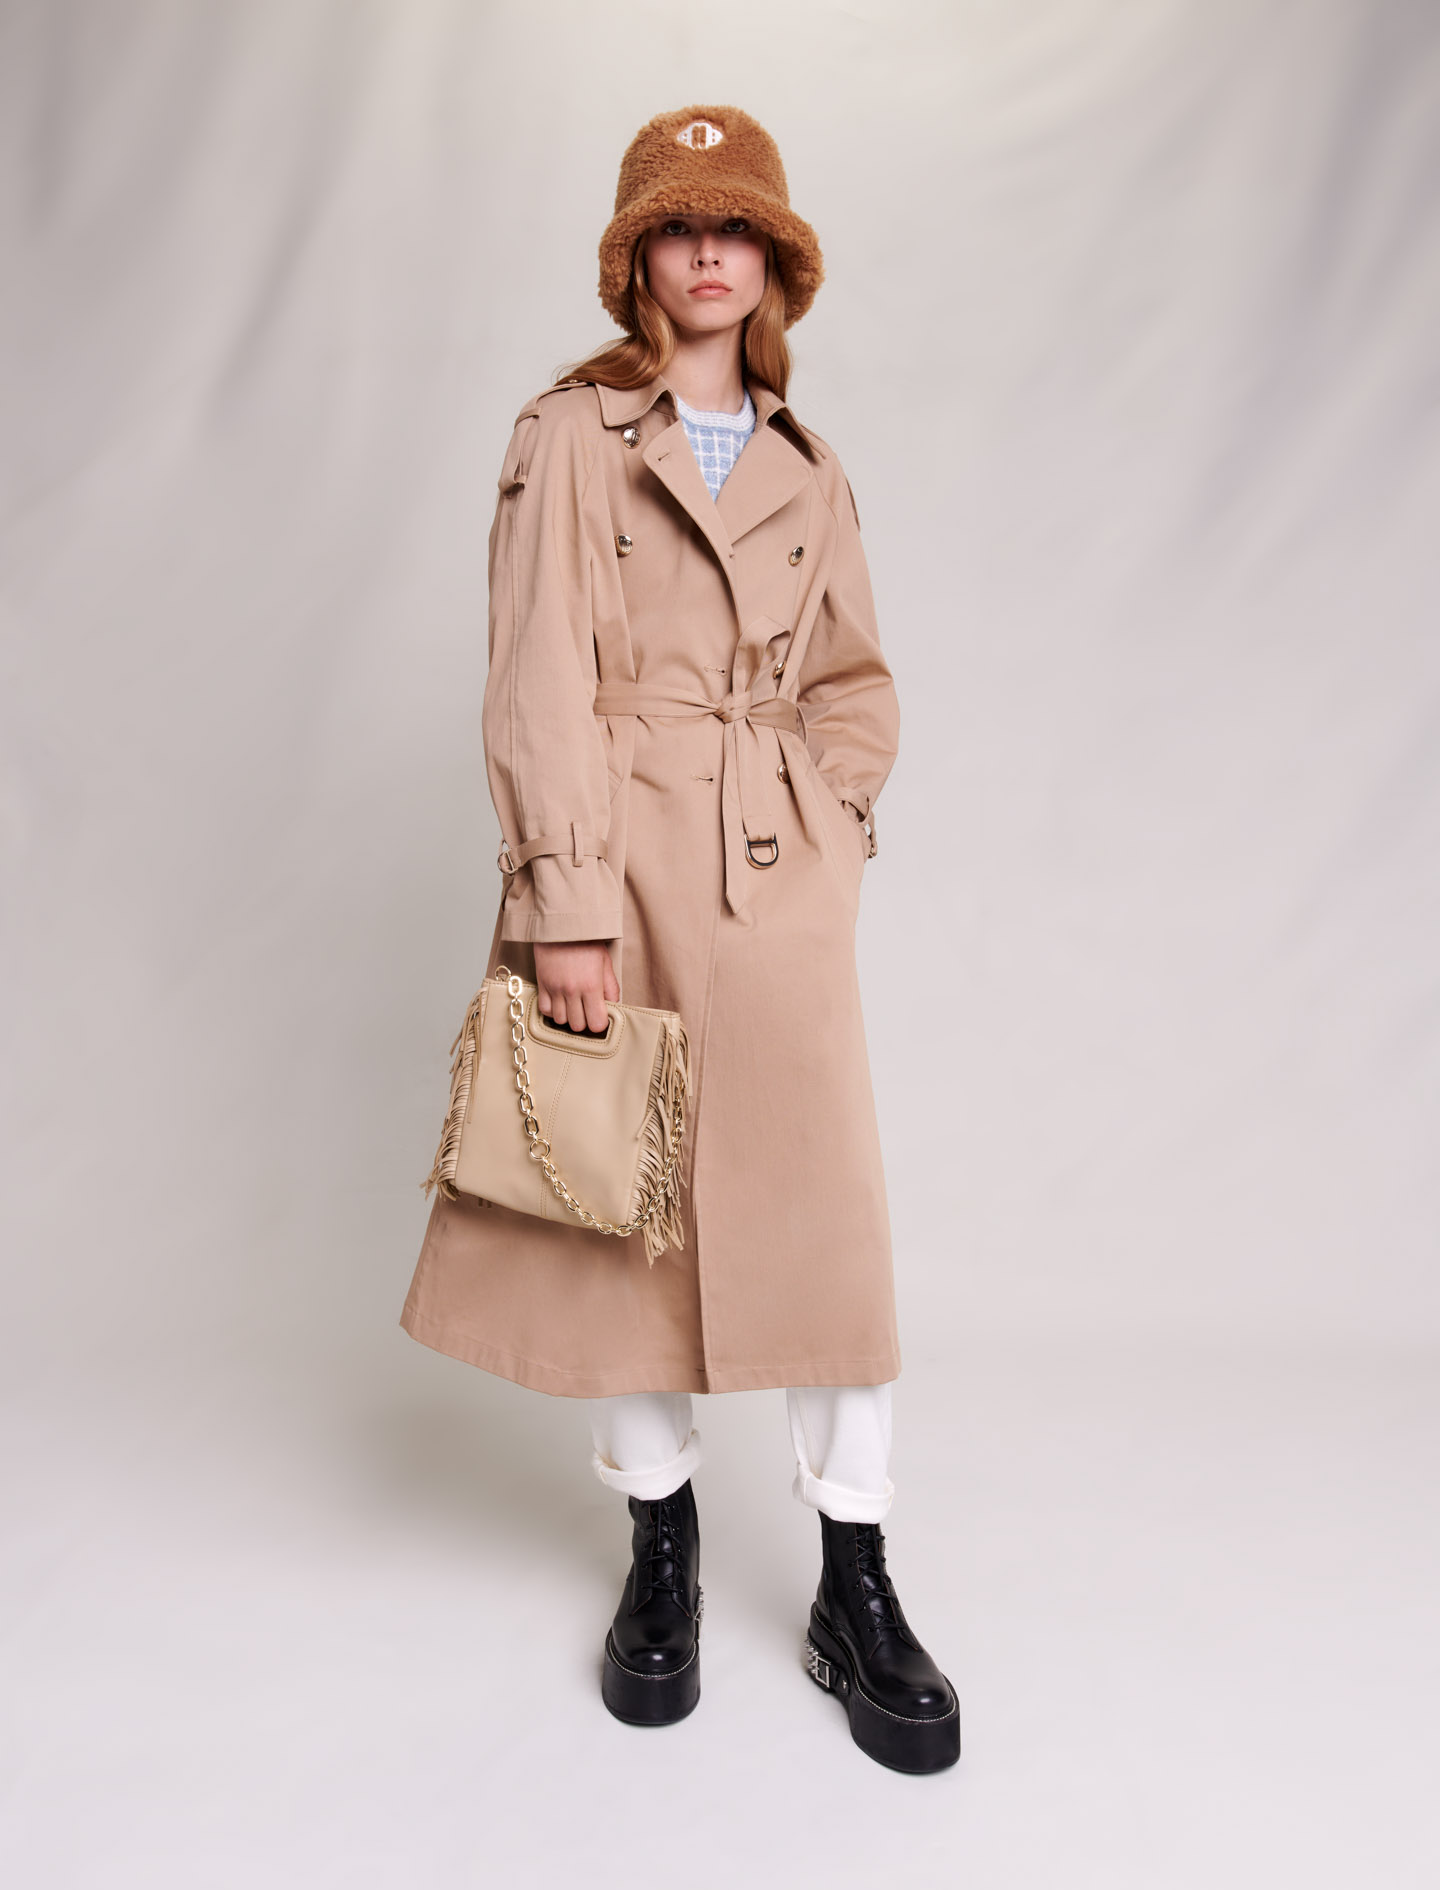 Maje Woman's cotton, Oversized trench coat for Fall/Winter, in color Beige / Beige